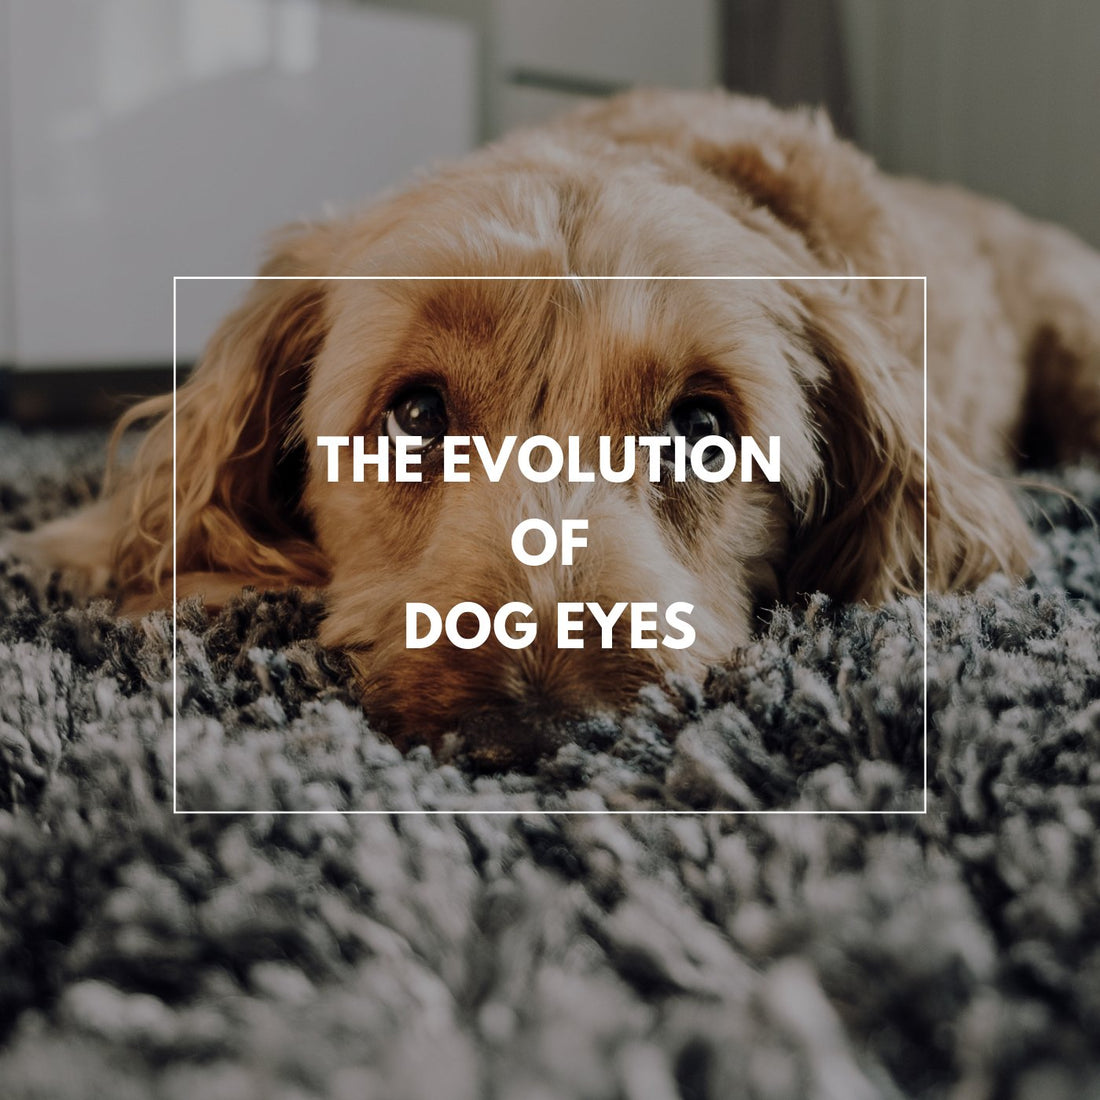 The Evolution of Dog Eyes - Proflax